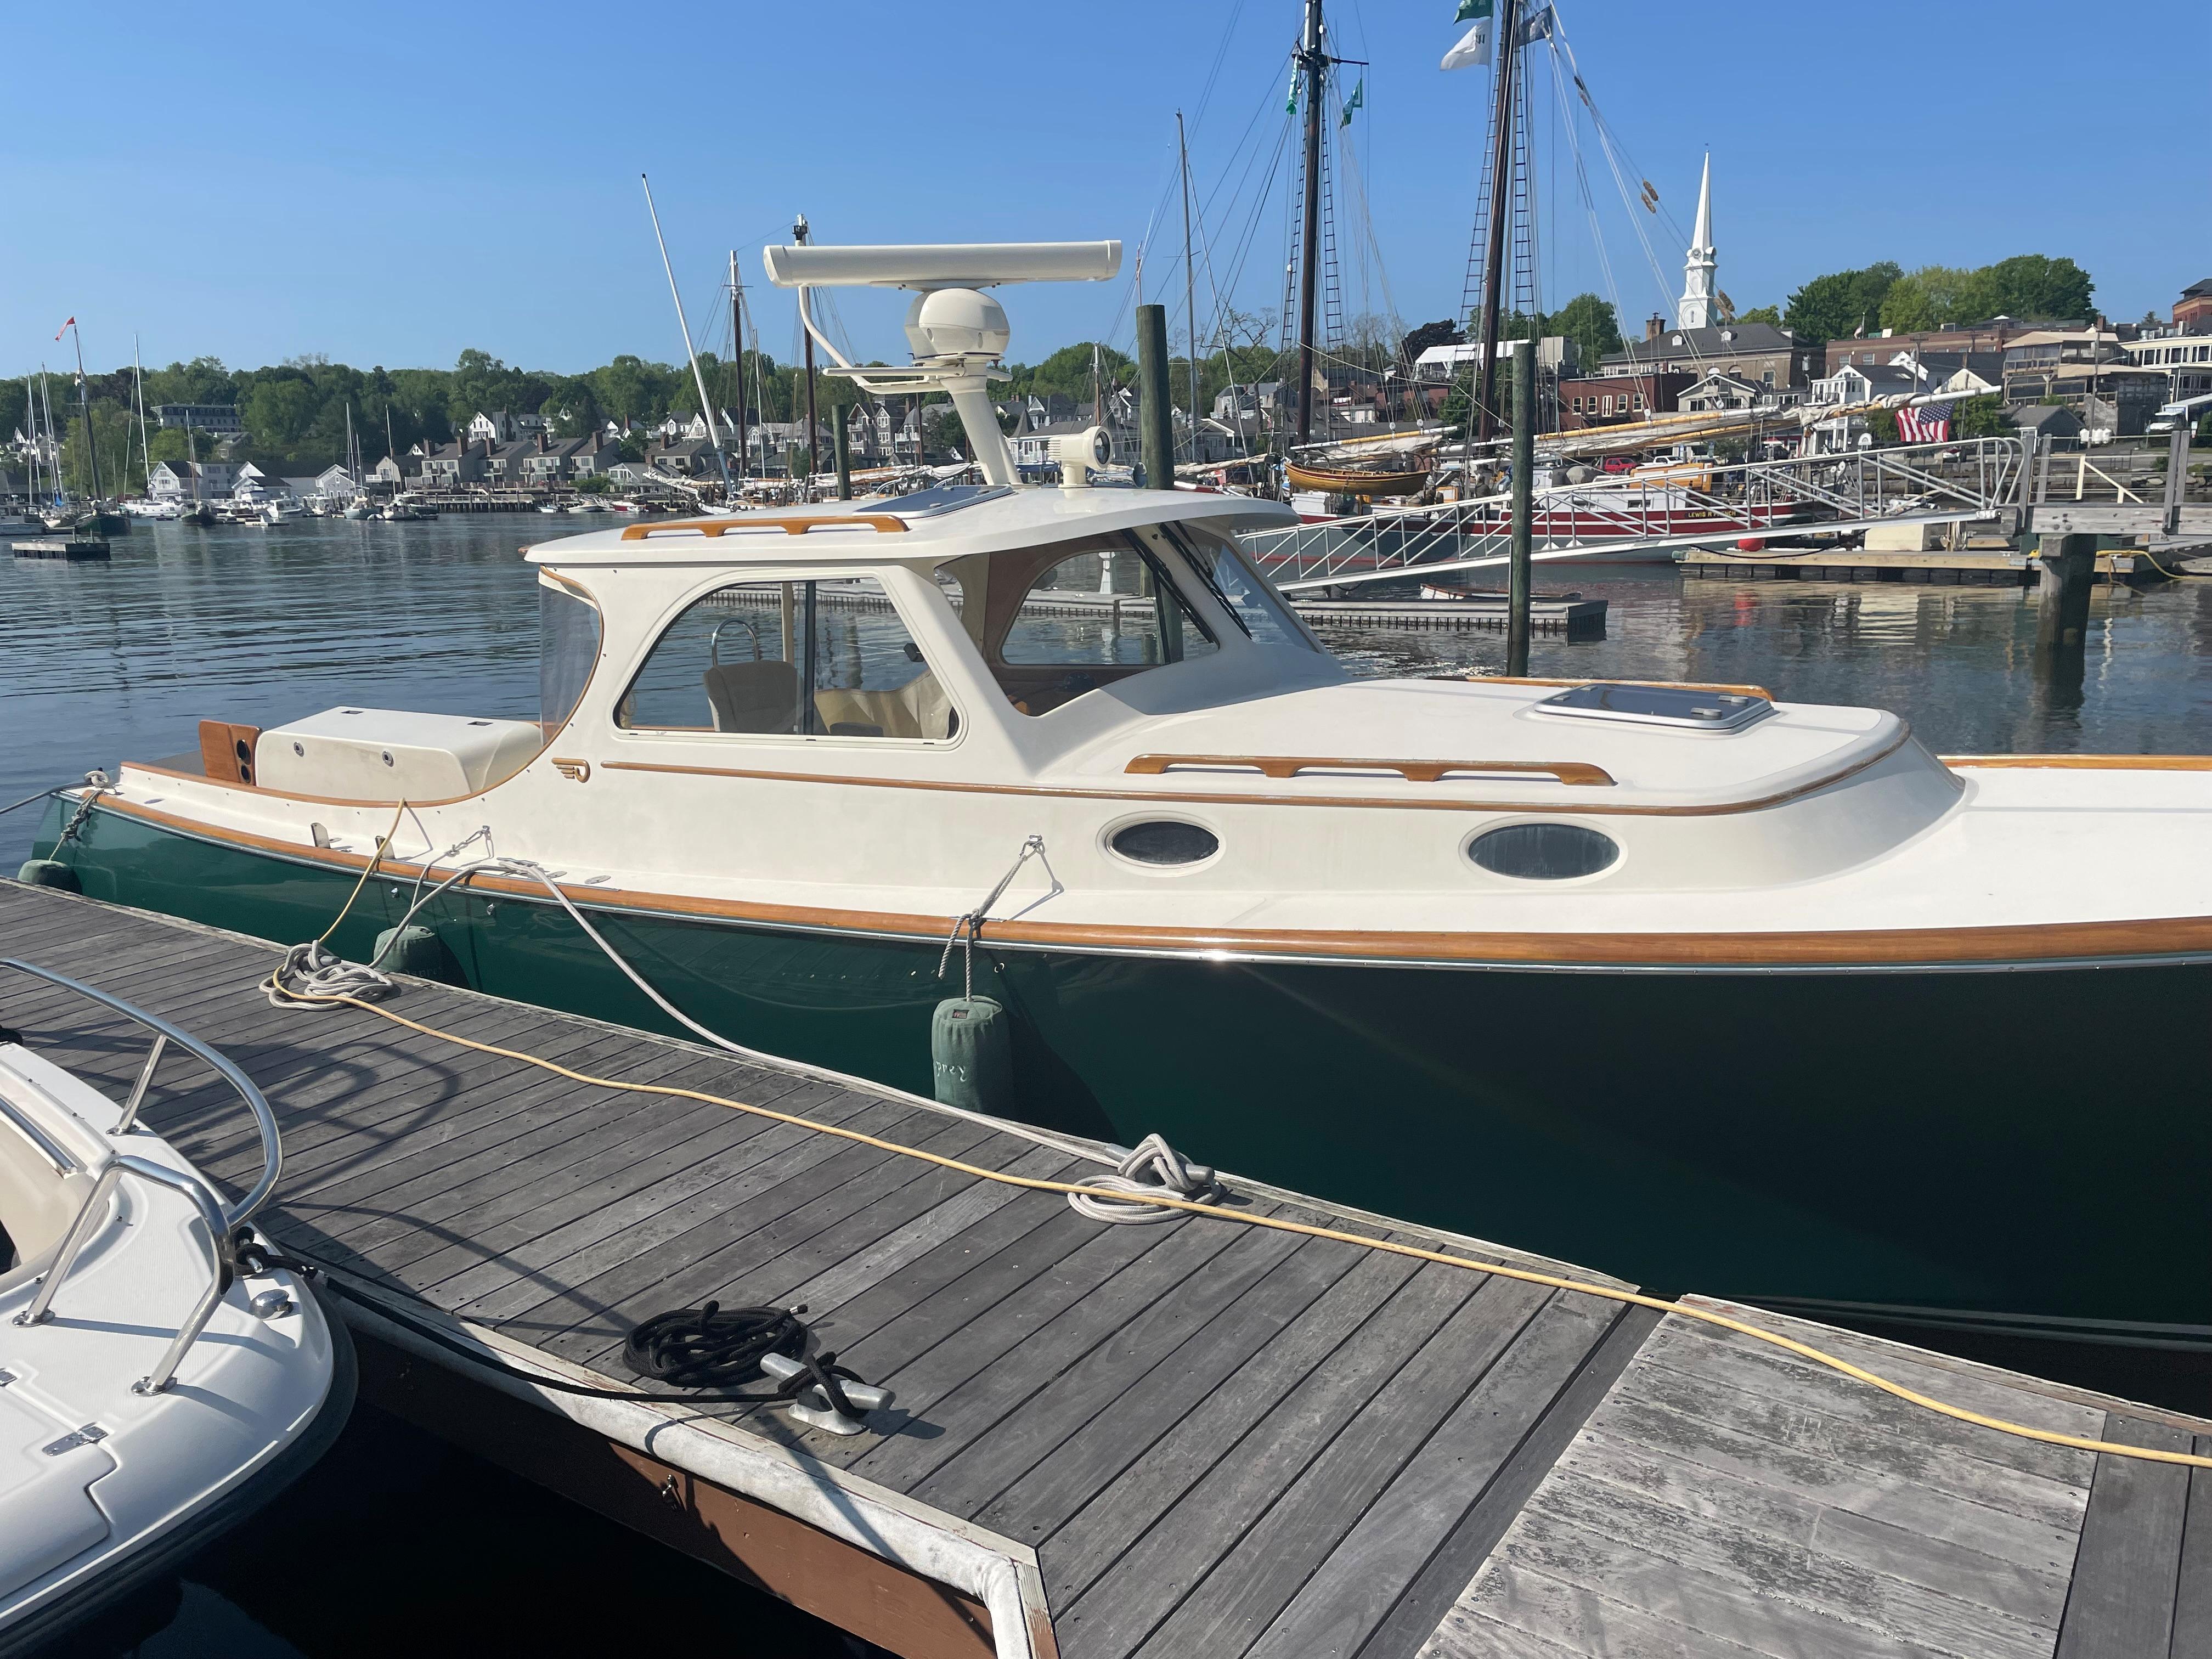 2000 Hinckley Picnic Boats Downeast for sale - YachtWorld